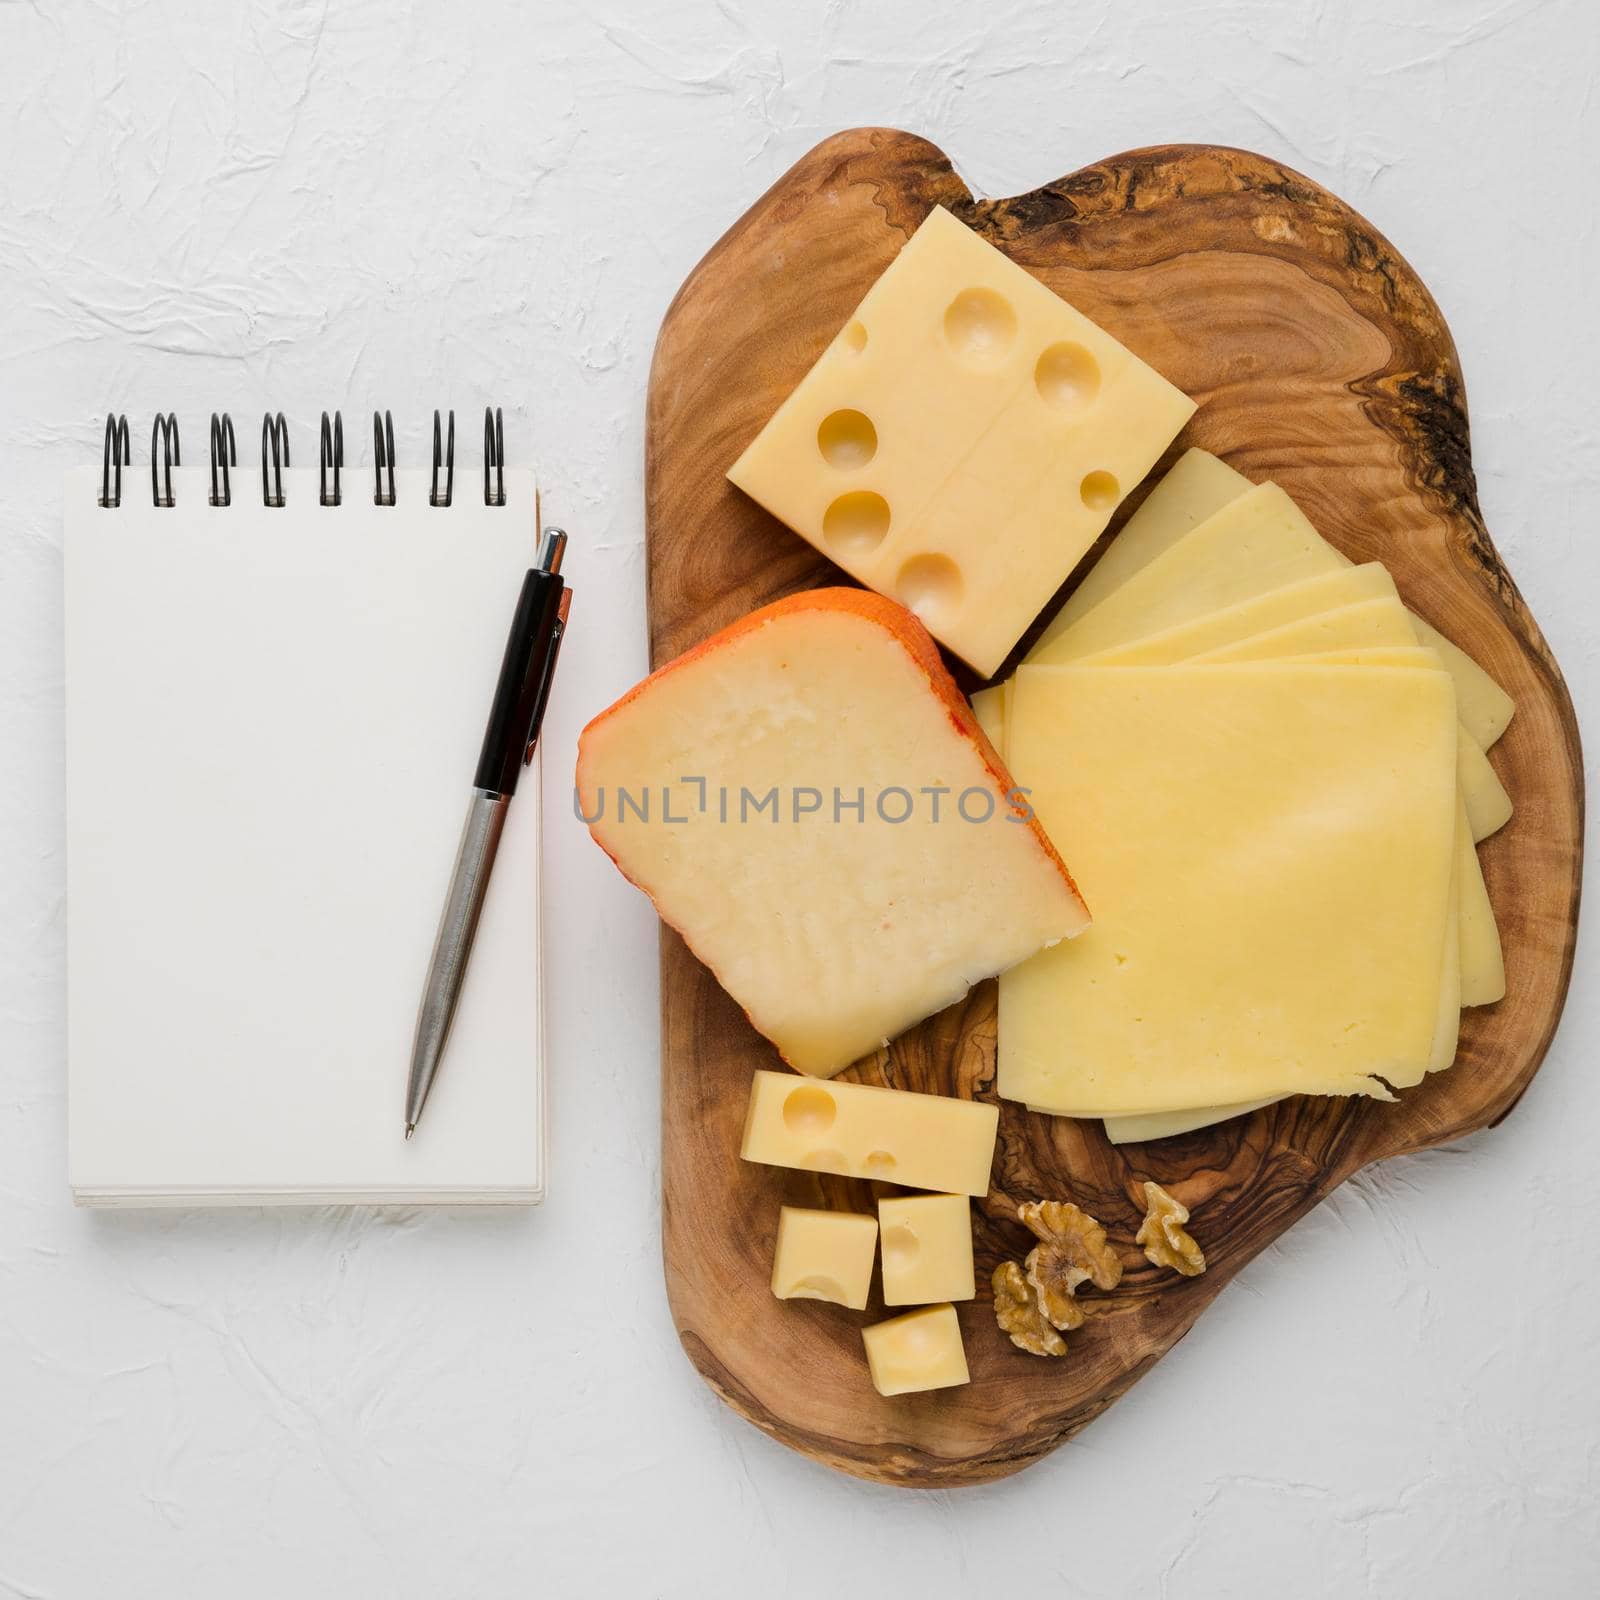 delicious cheese platter blank spiral dairy with pen against plain background by Zahard